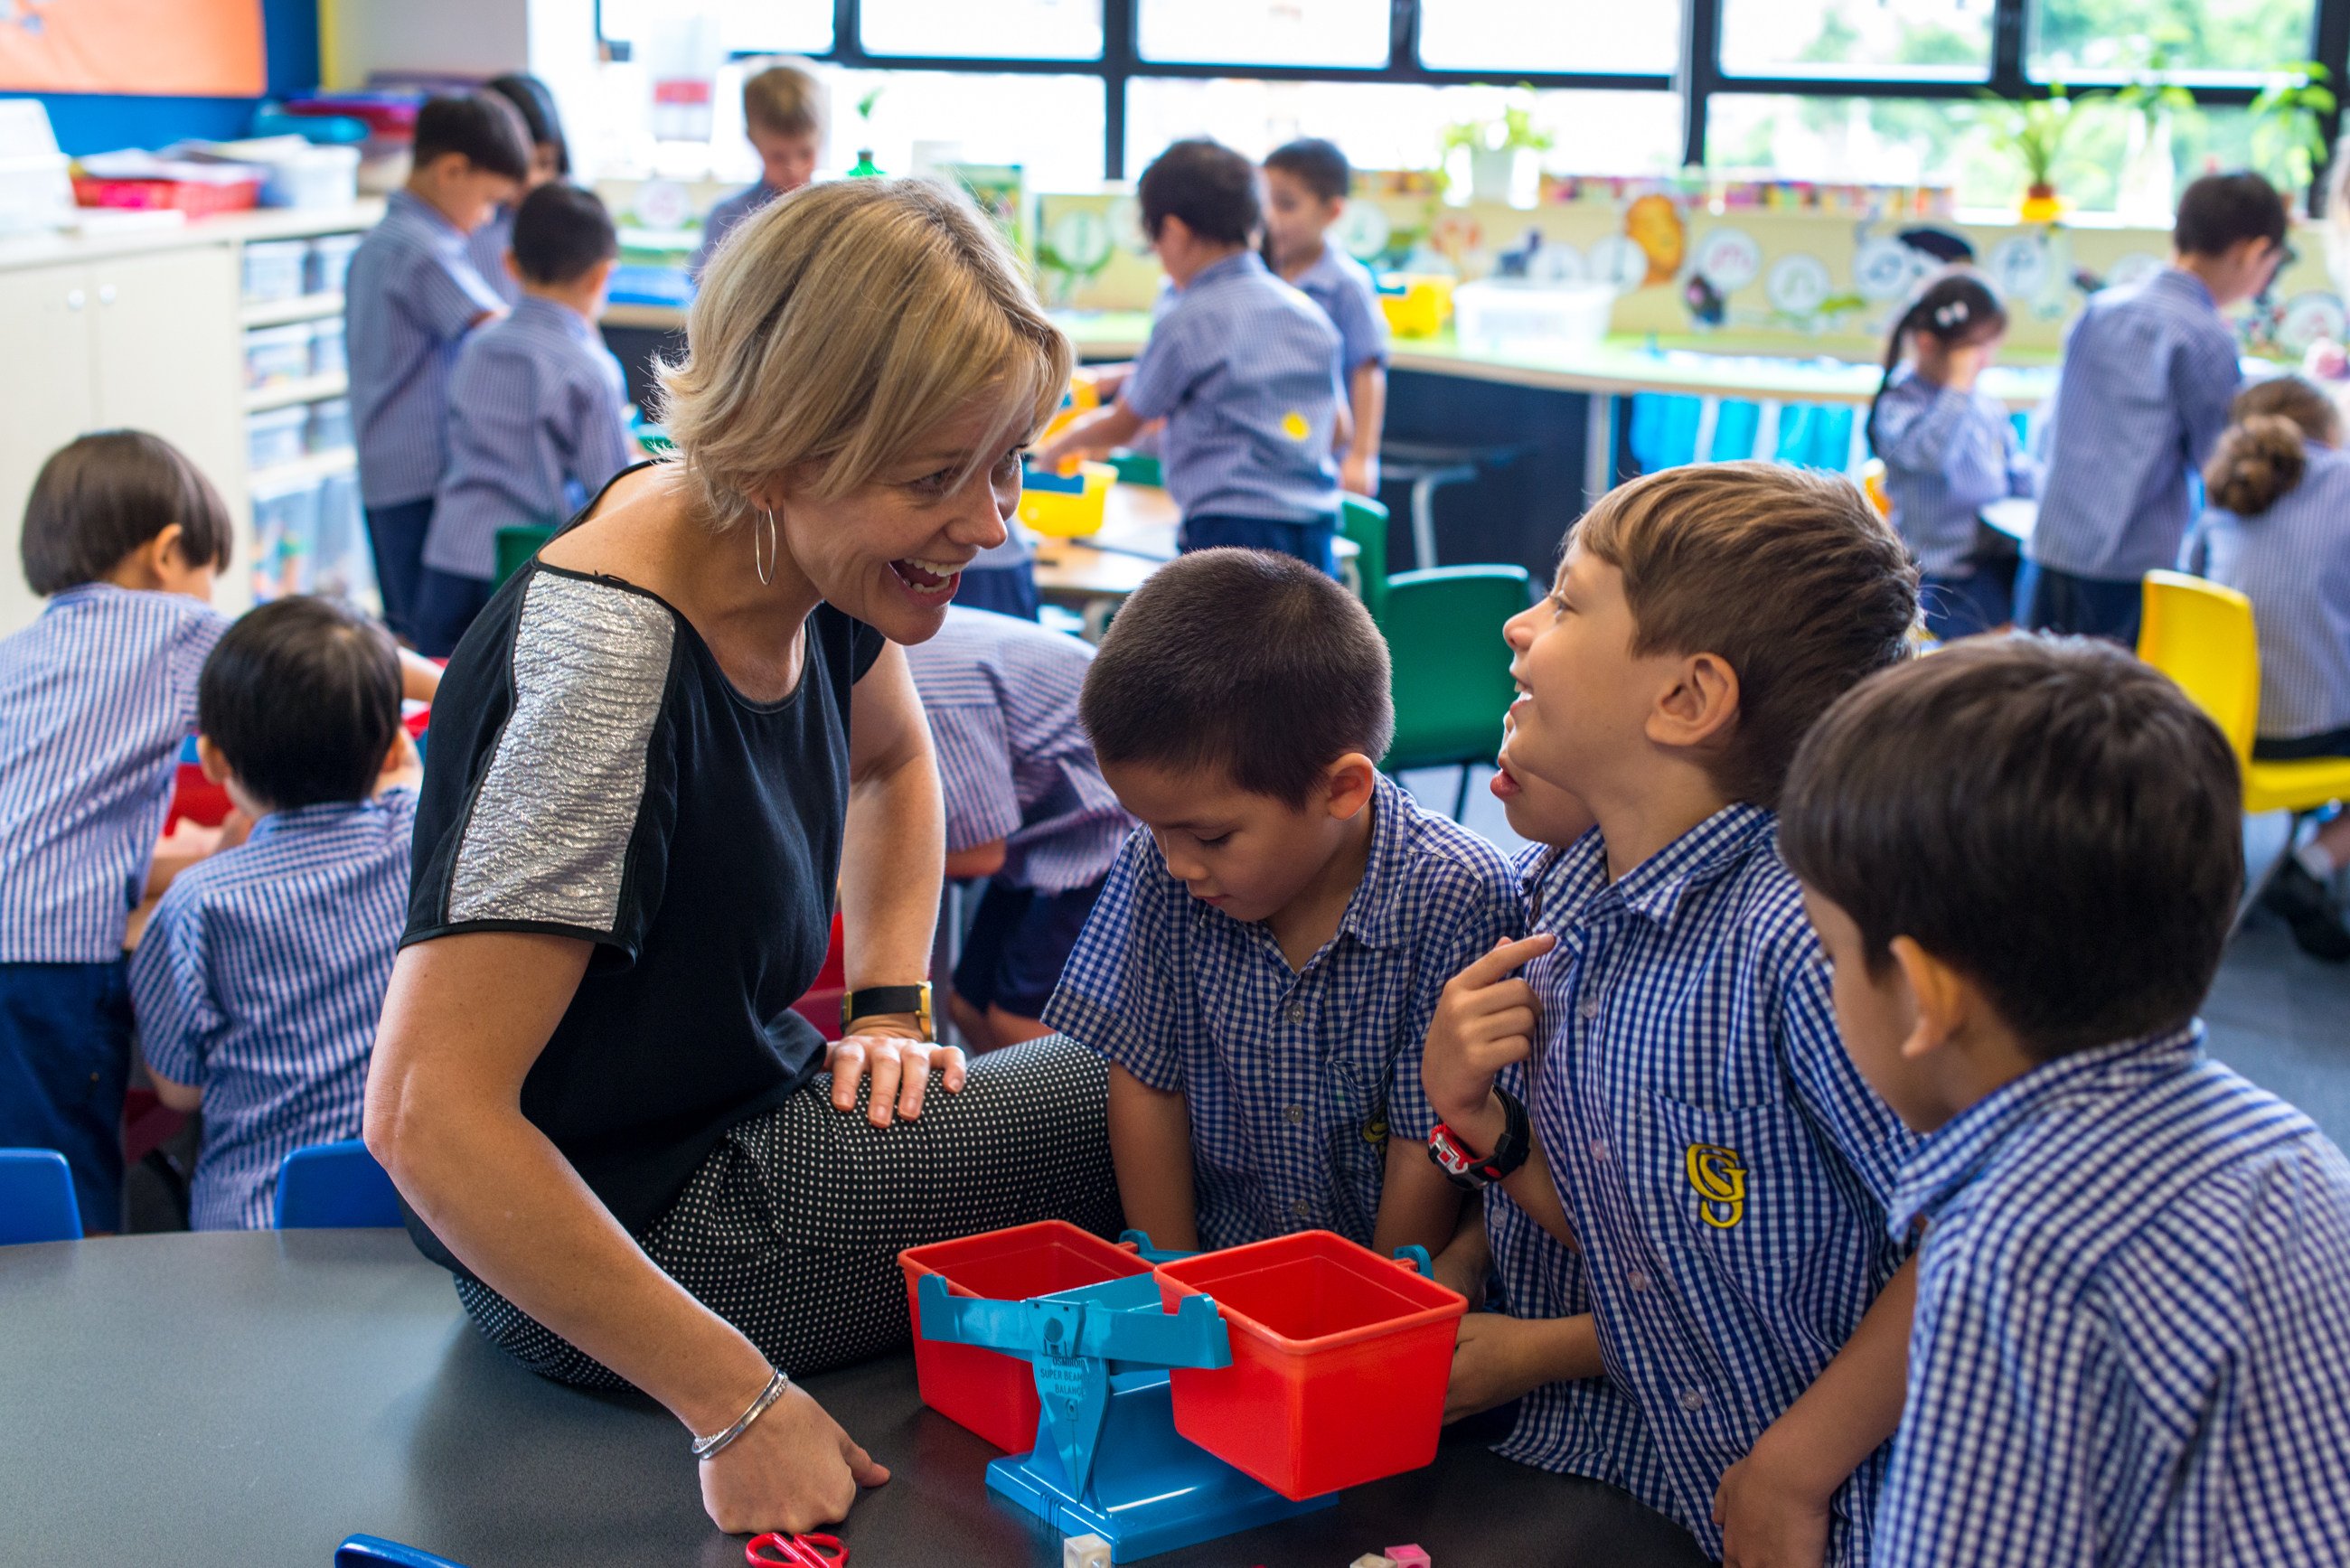 ESF institutions such as Glenealy School, pictured, follow the IB curriculum. Photo: Handout